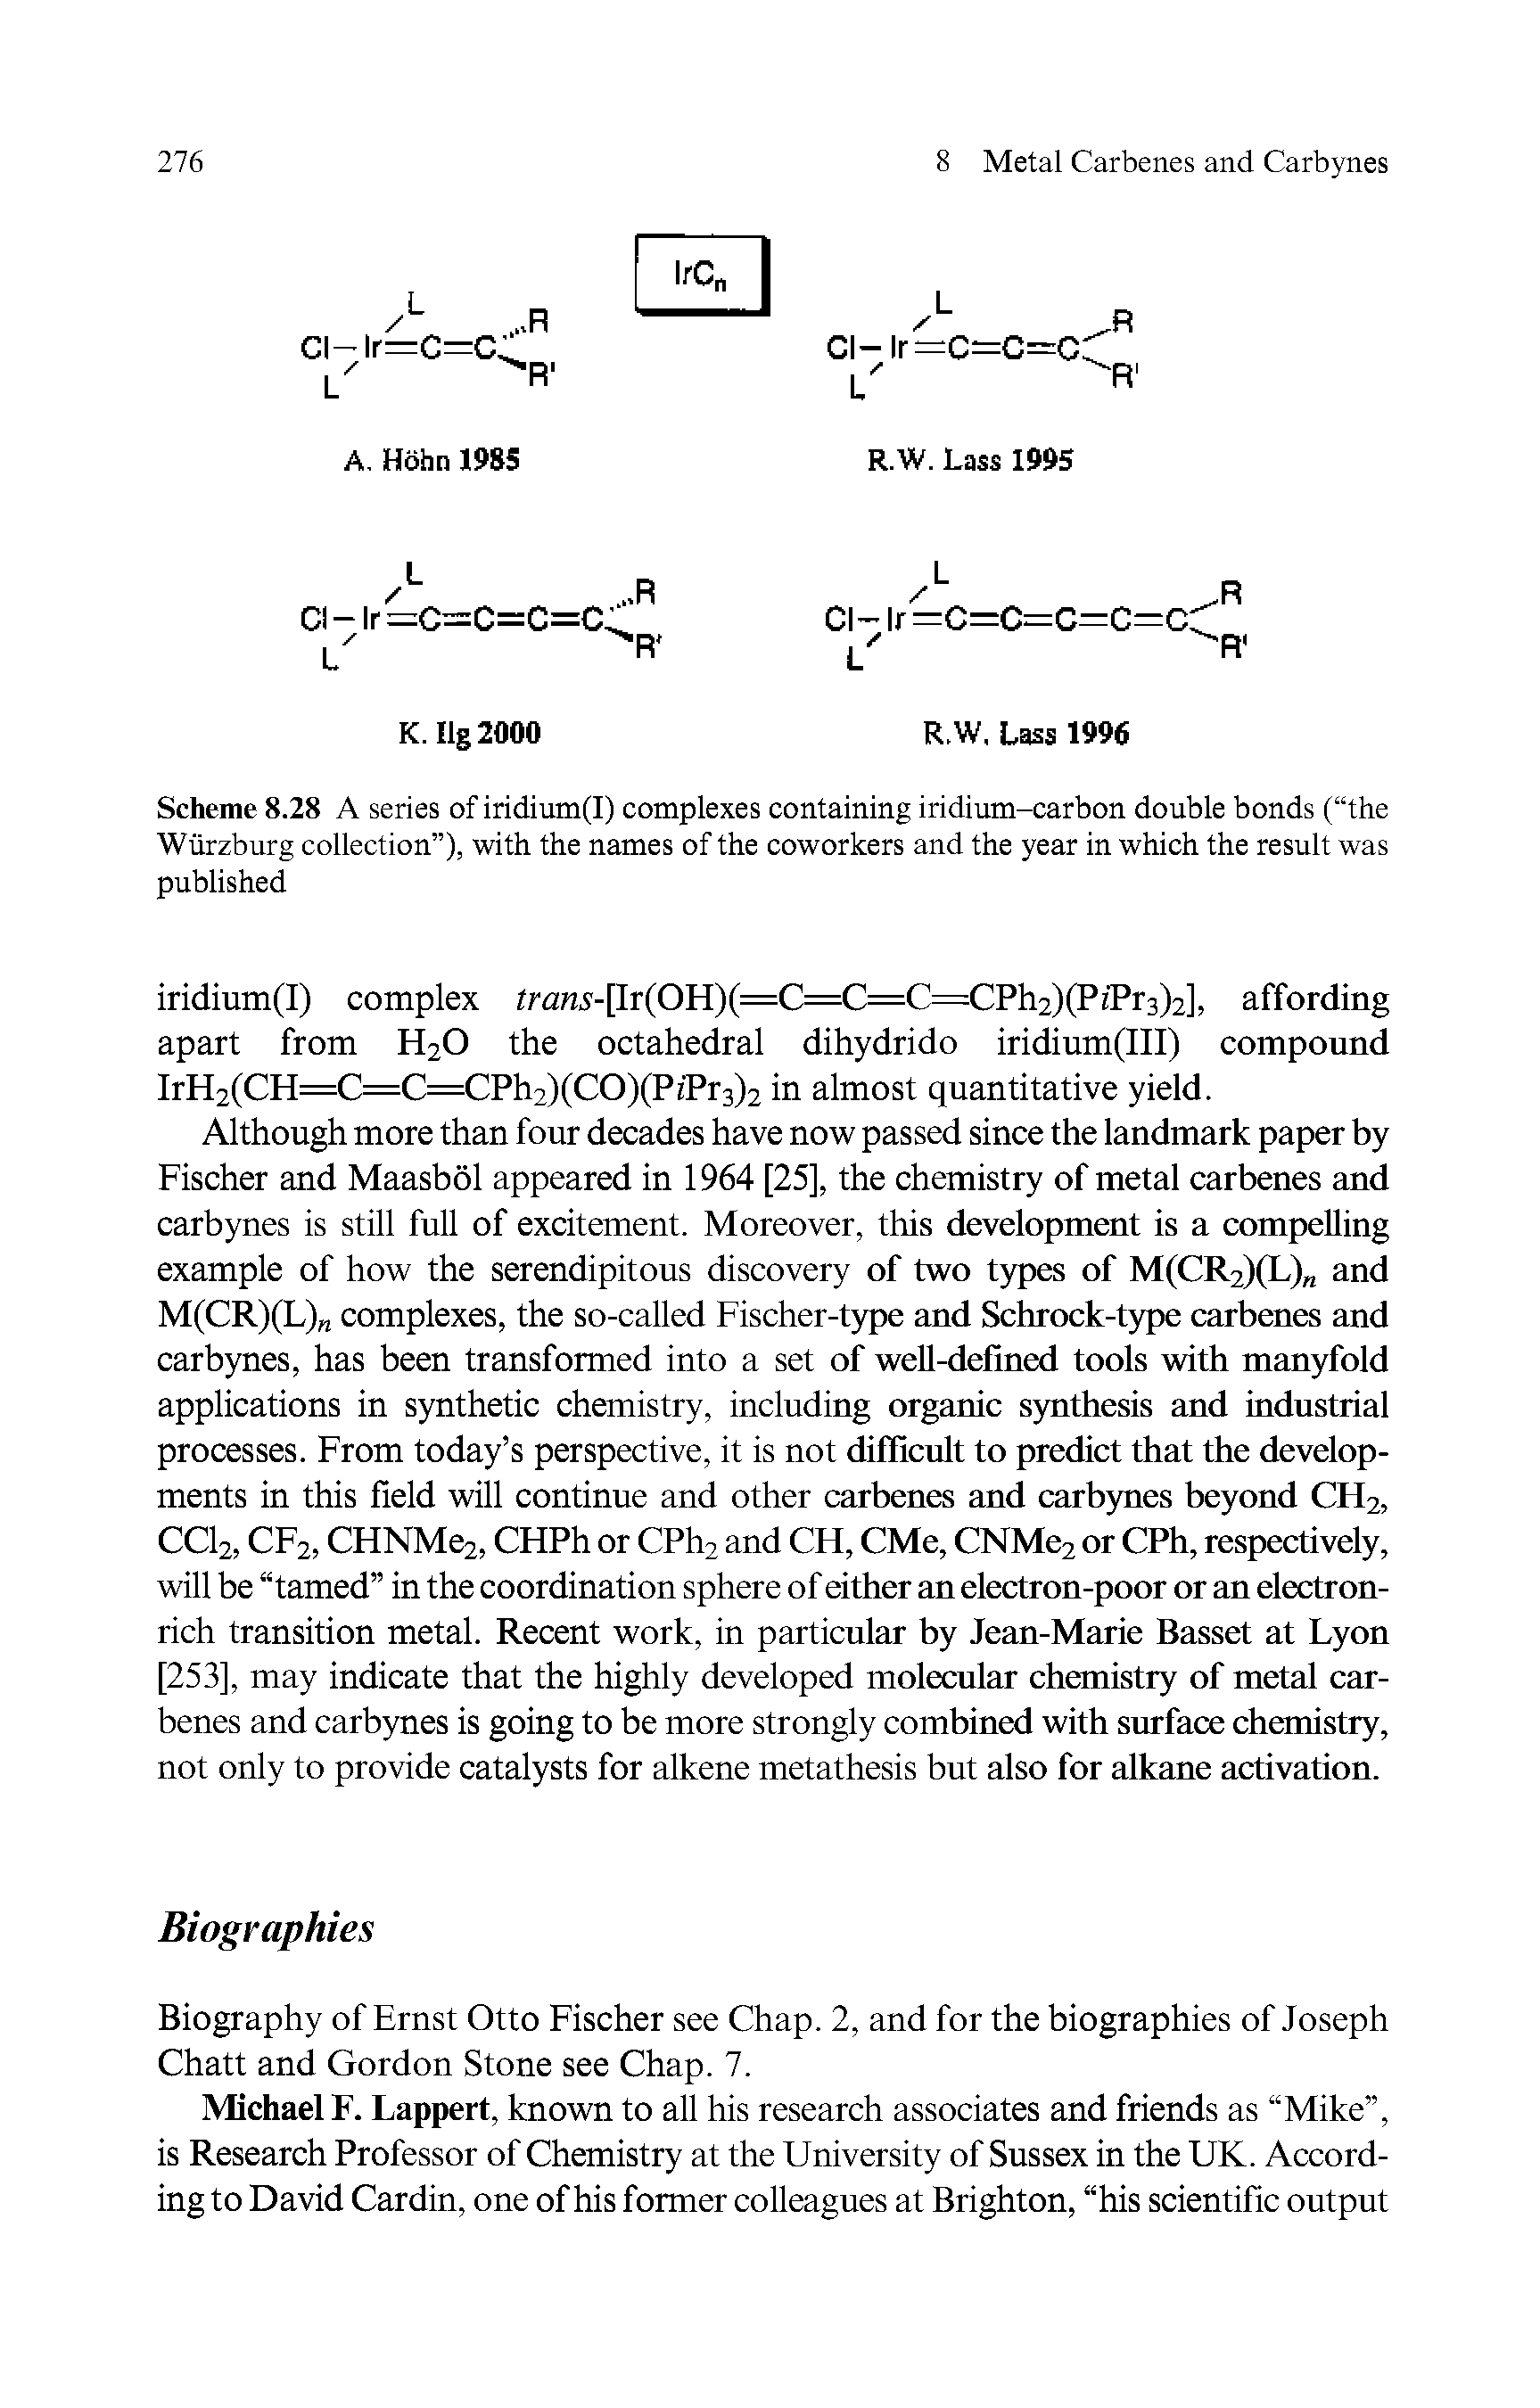 Scheme 8.28 A series of iridium(I) complexes containing iridium-carbon double bonds ( the Wurzburg collection ), with the names of the coworkers and the year in which the result was published...